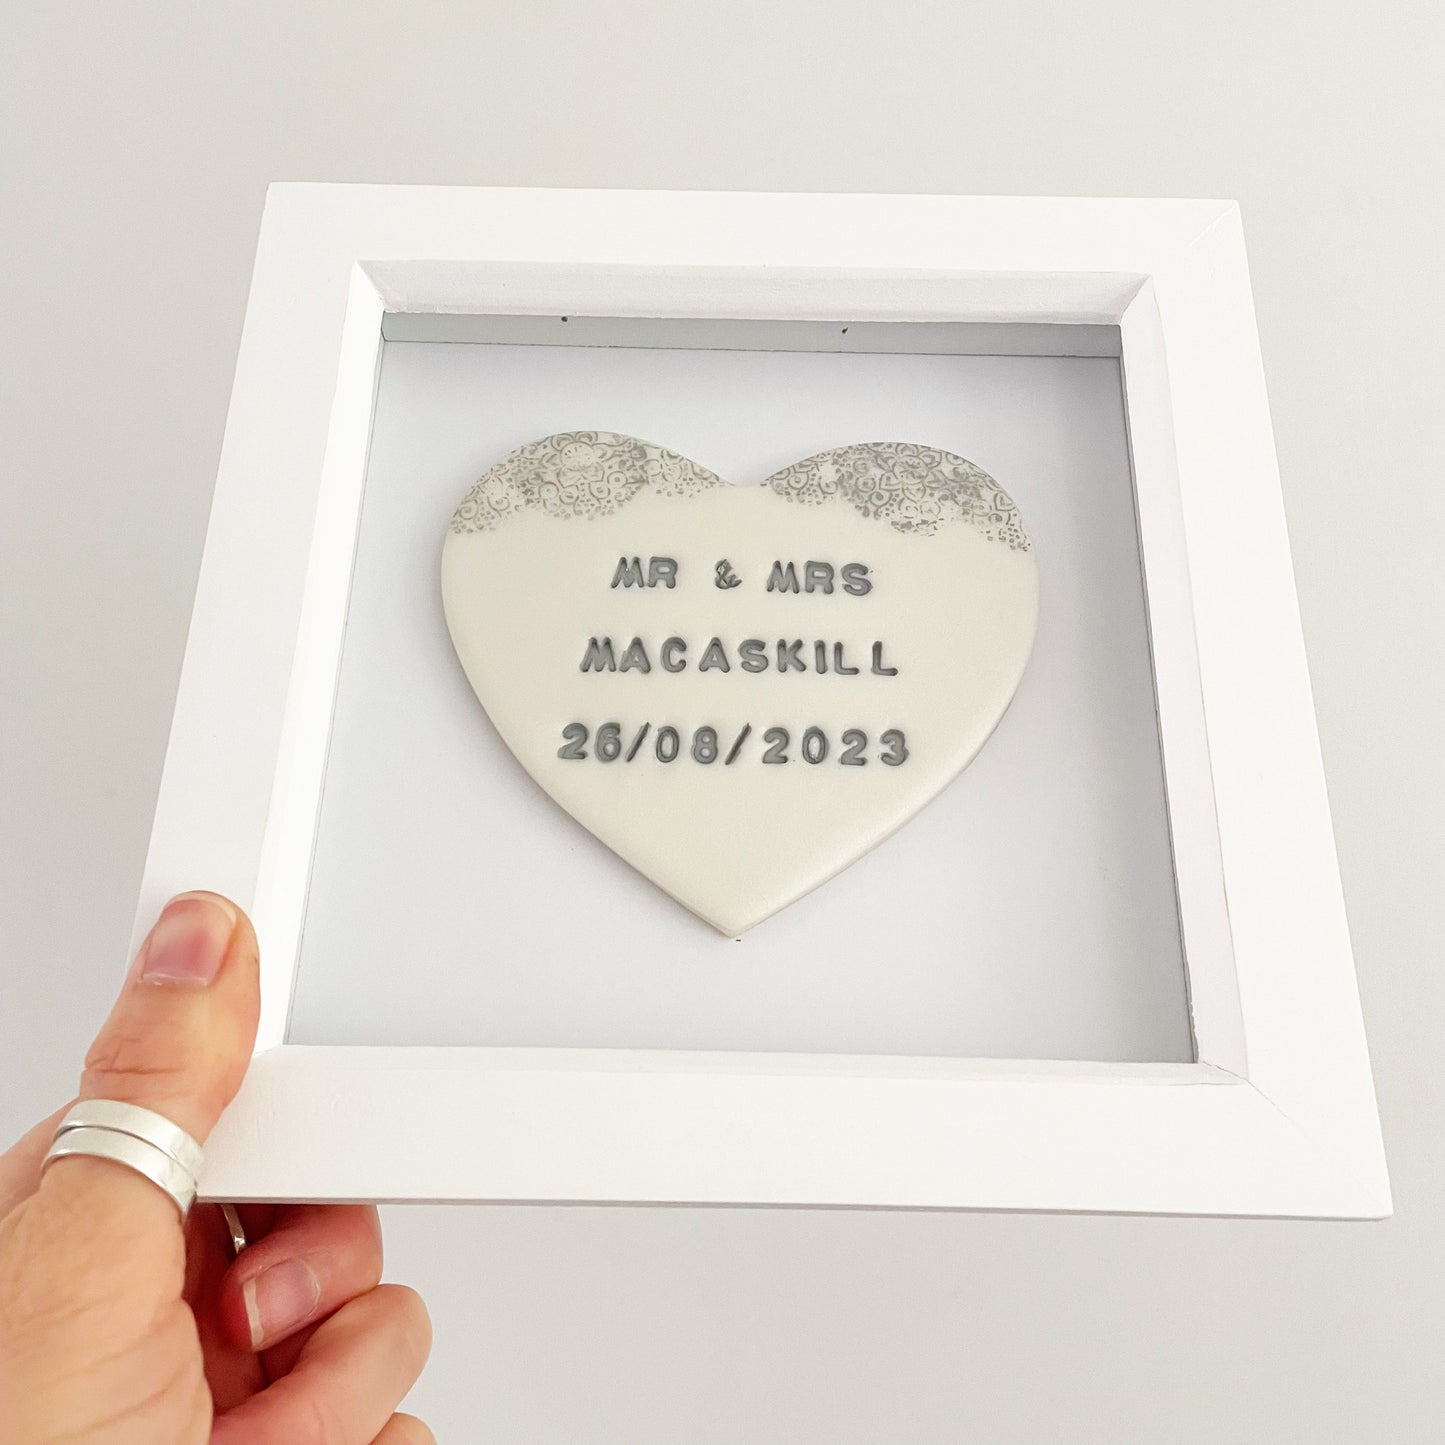 Personalised framed wedding gift, pearlised white clay heart with a grey lace edge at the top of the heart in a white box frame, the heart is personalised with MR & MRS MACASKILL 26/08/2023